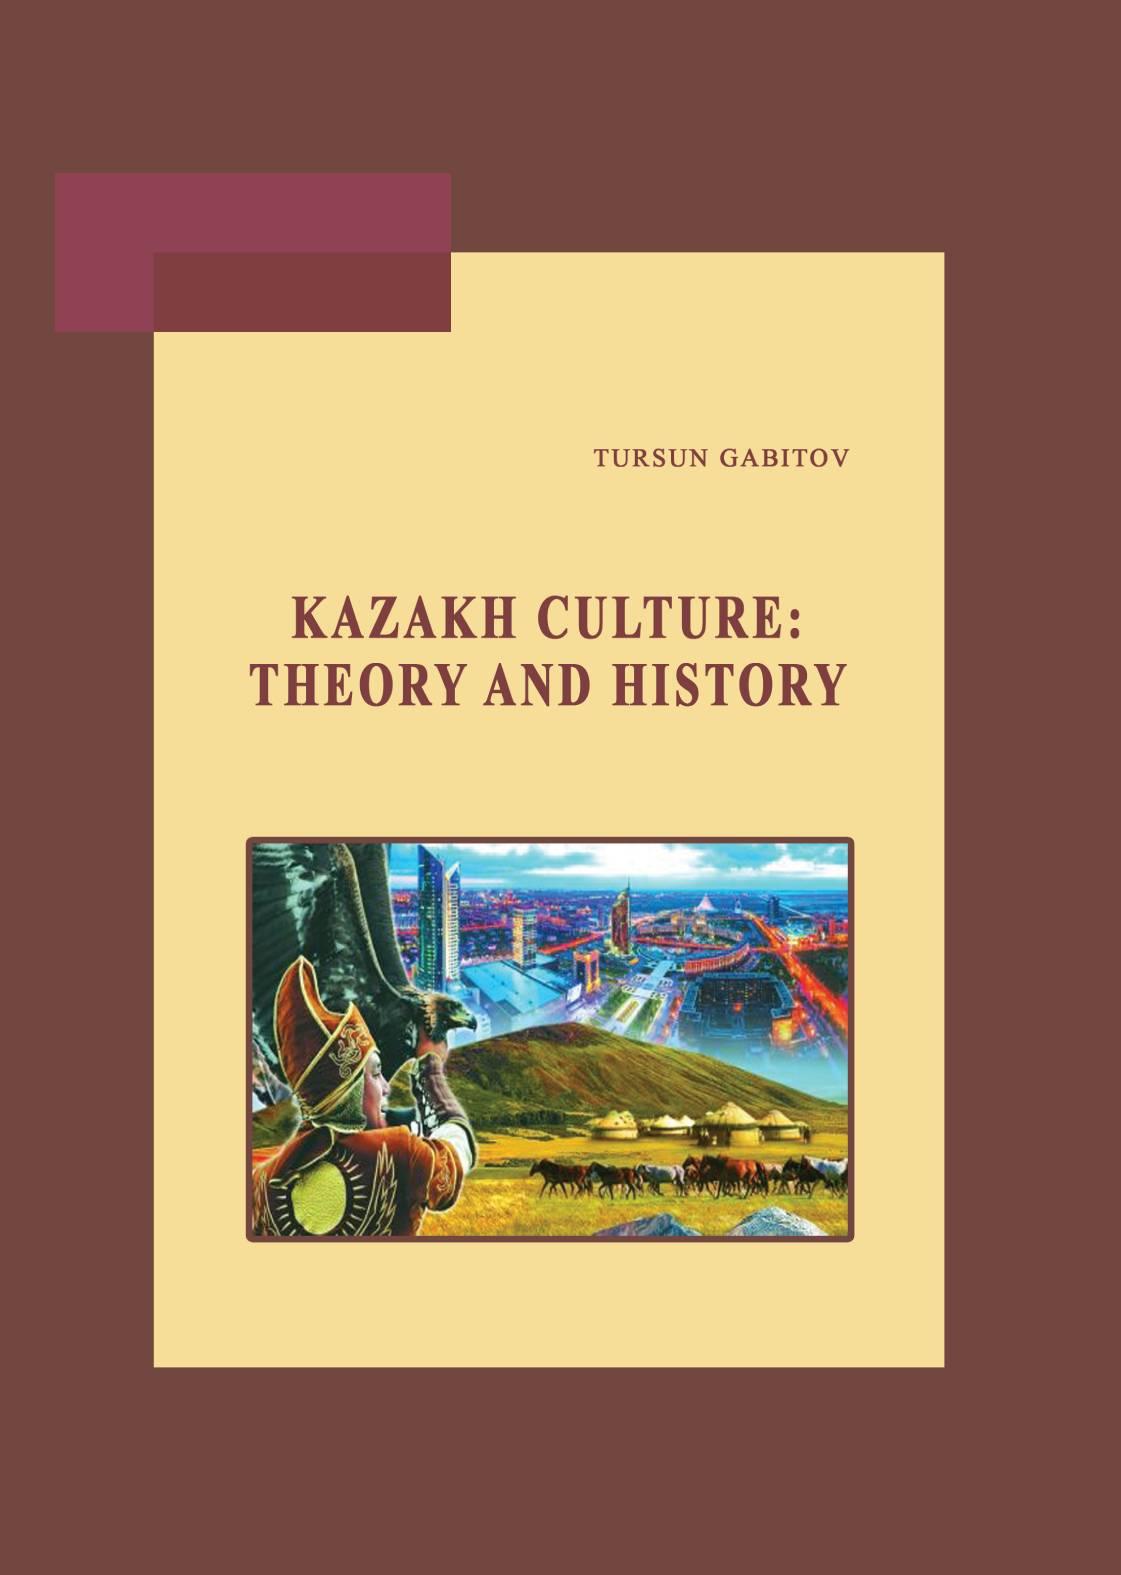 Kazakh culture: Theory and history.